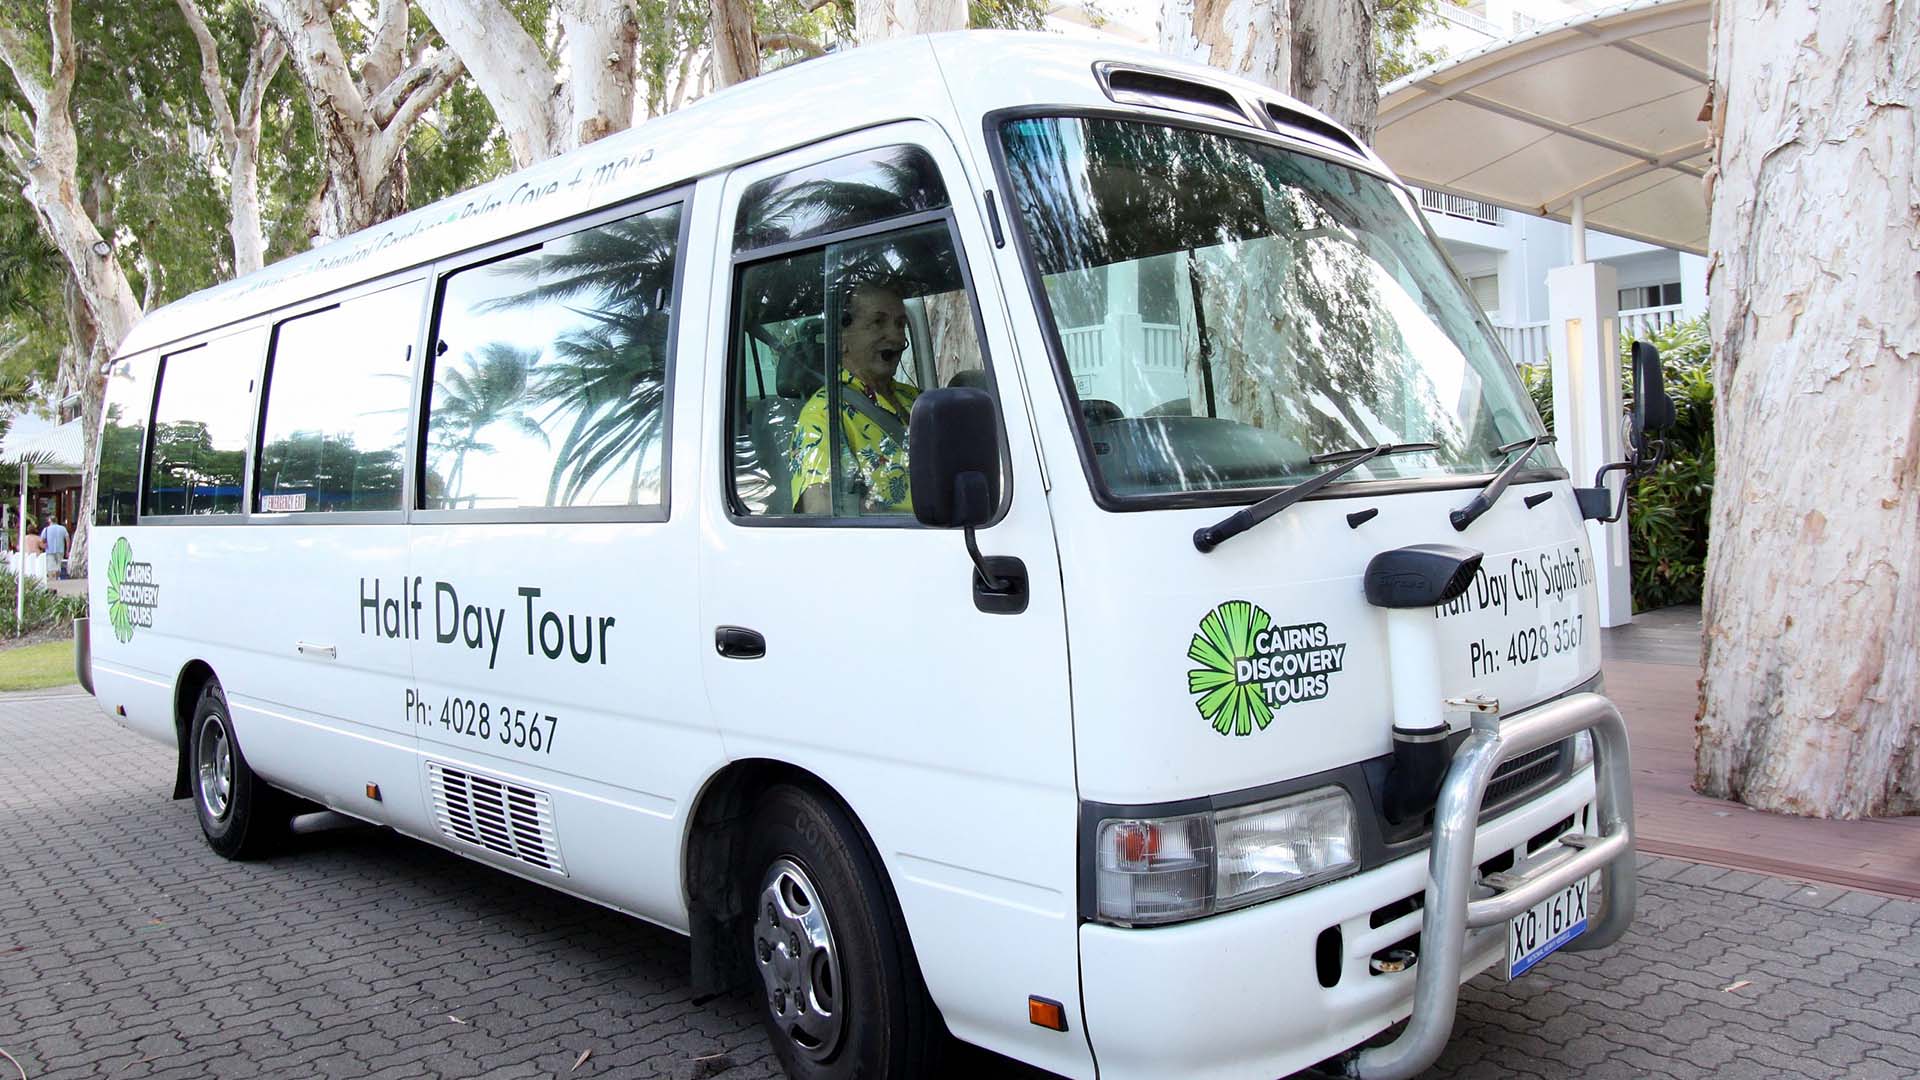 cairns discovery tours - day tour bus